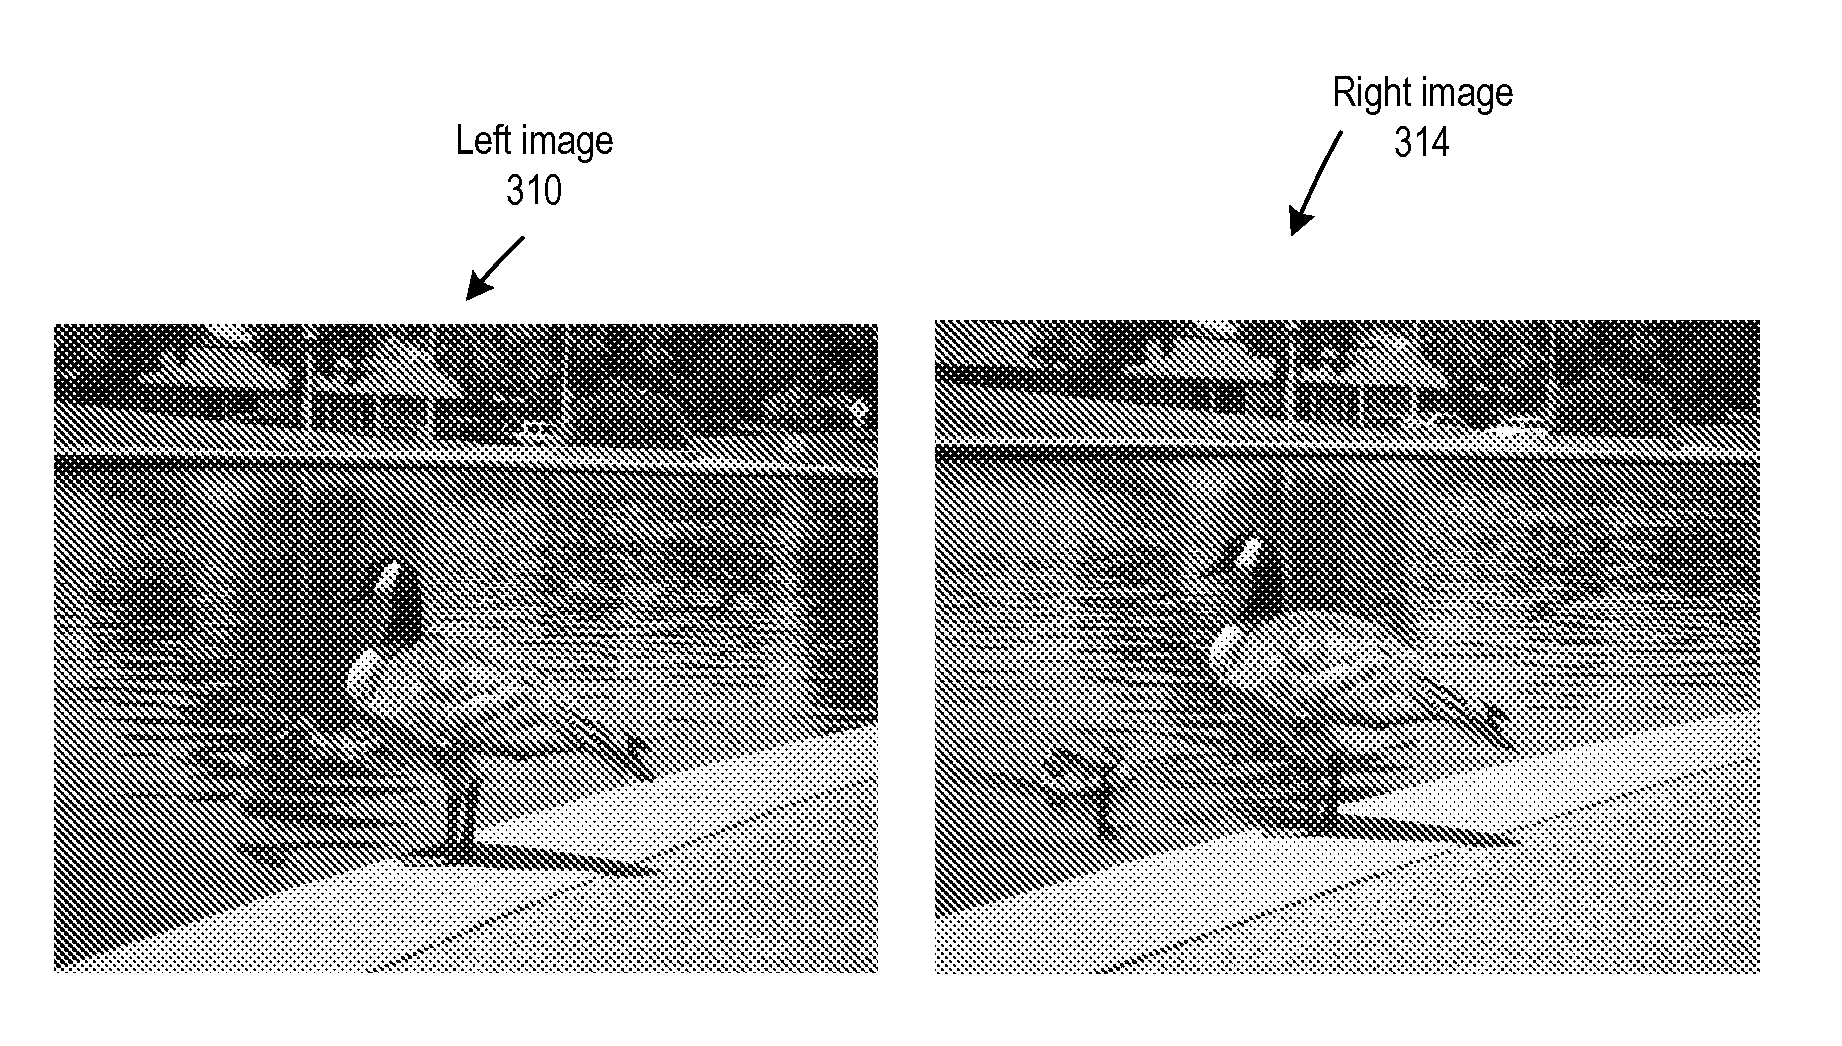 Methods and Apparatus for Image Rectification for Stereo Display